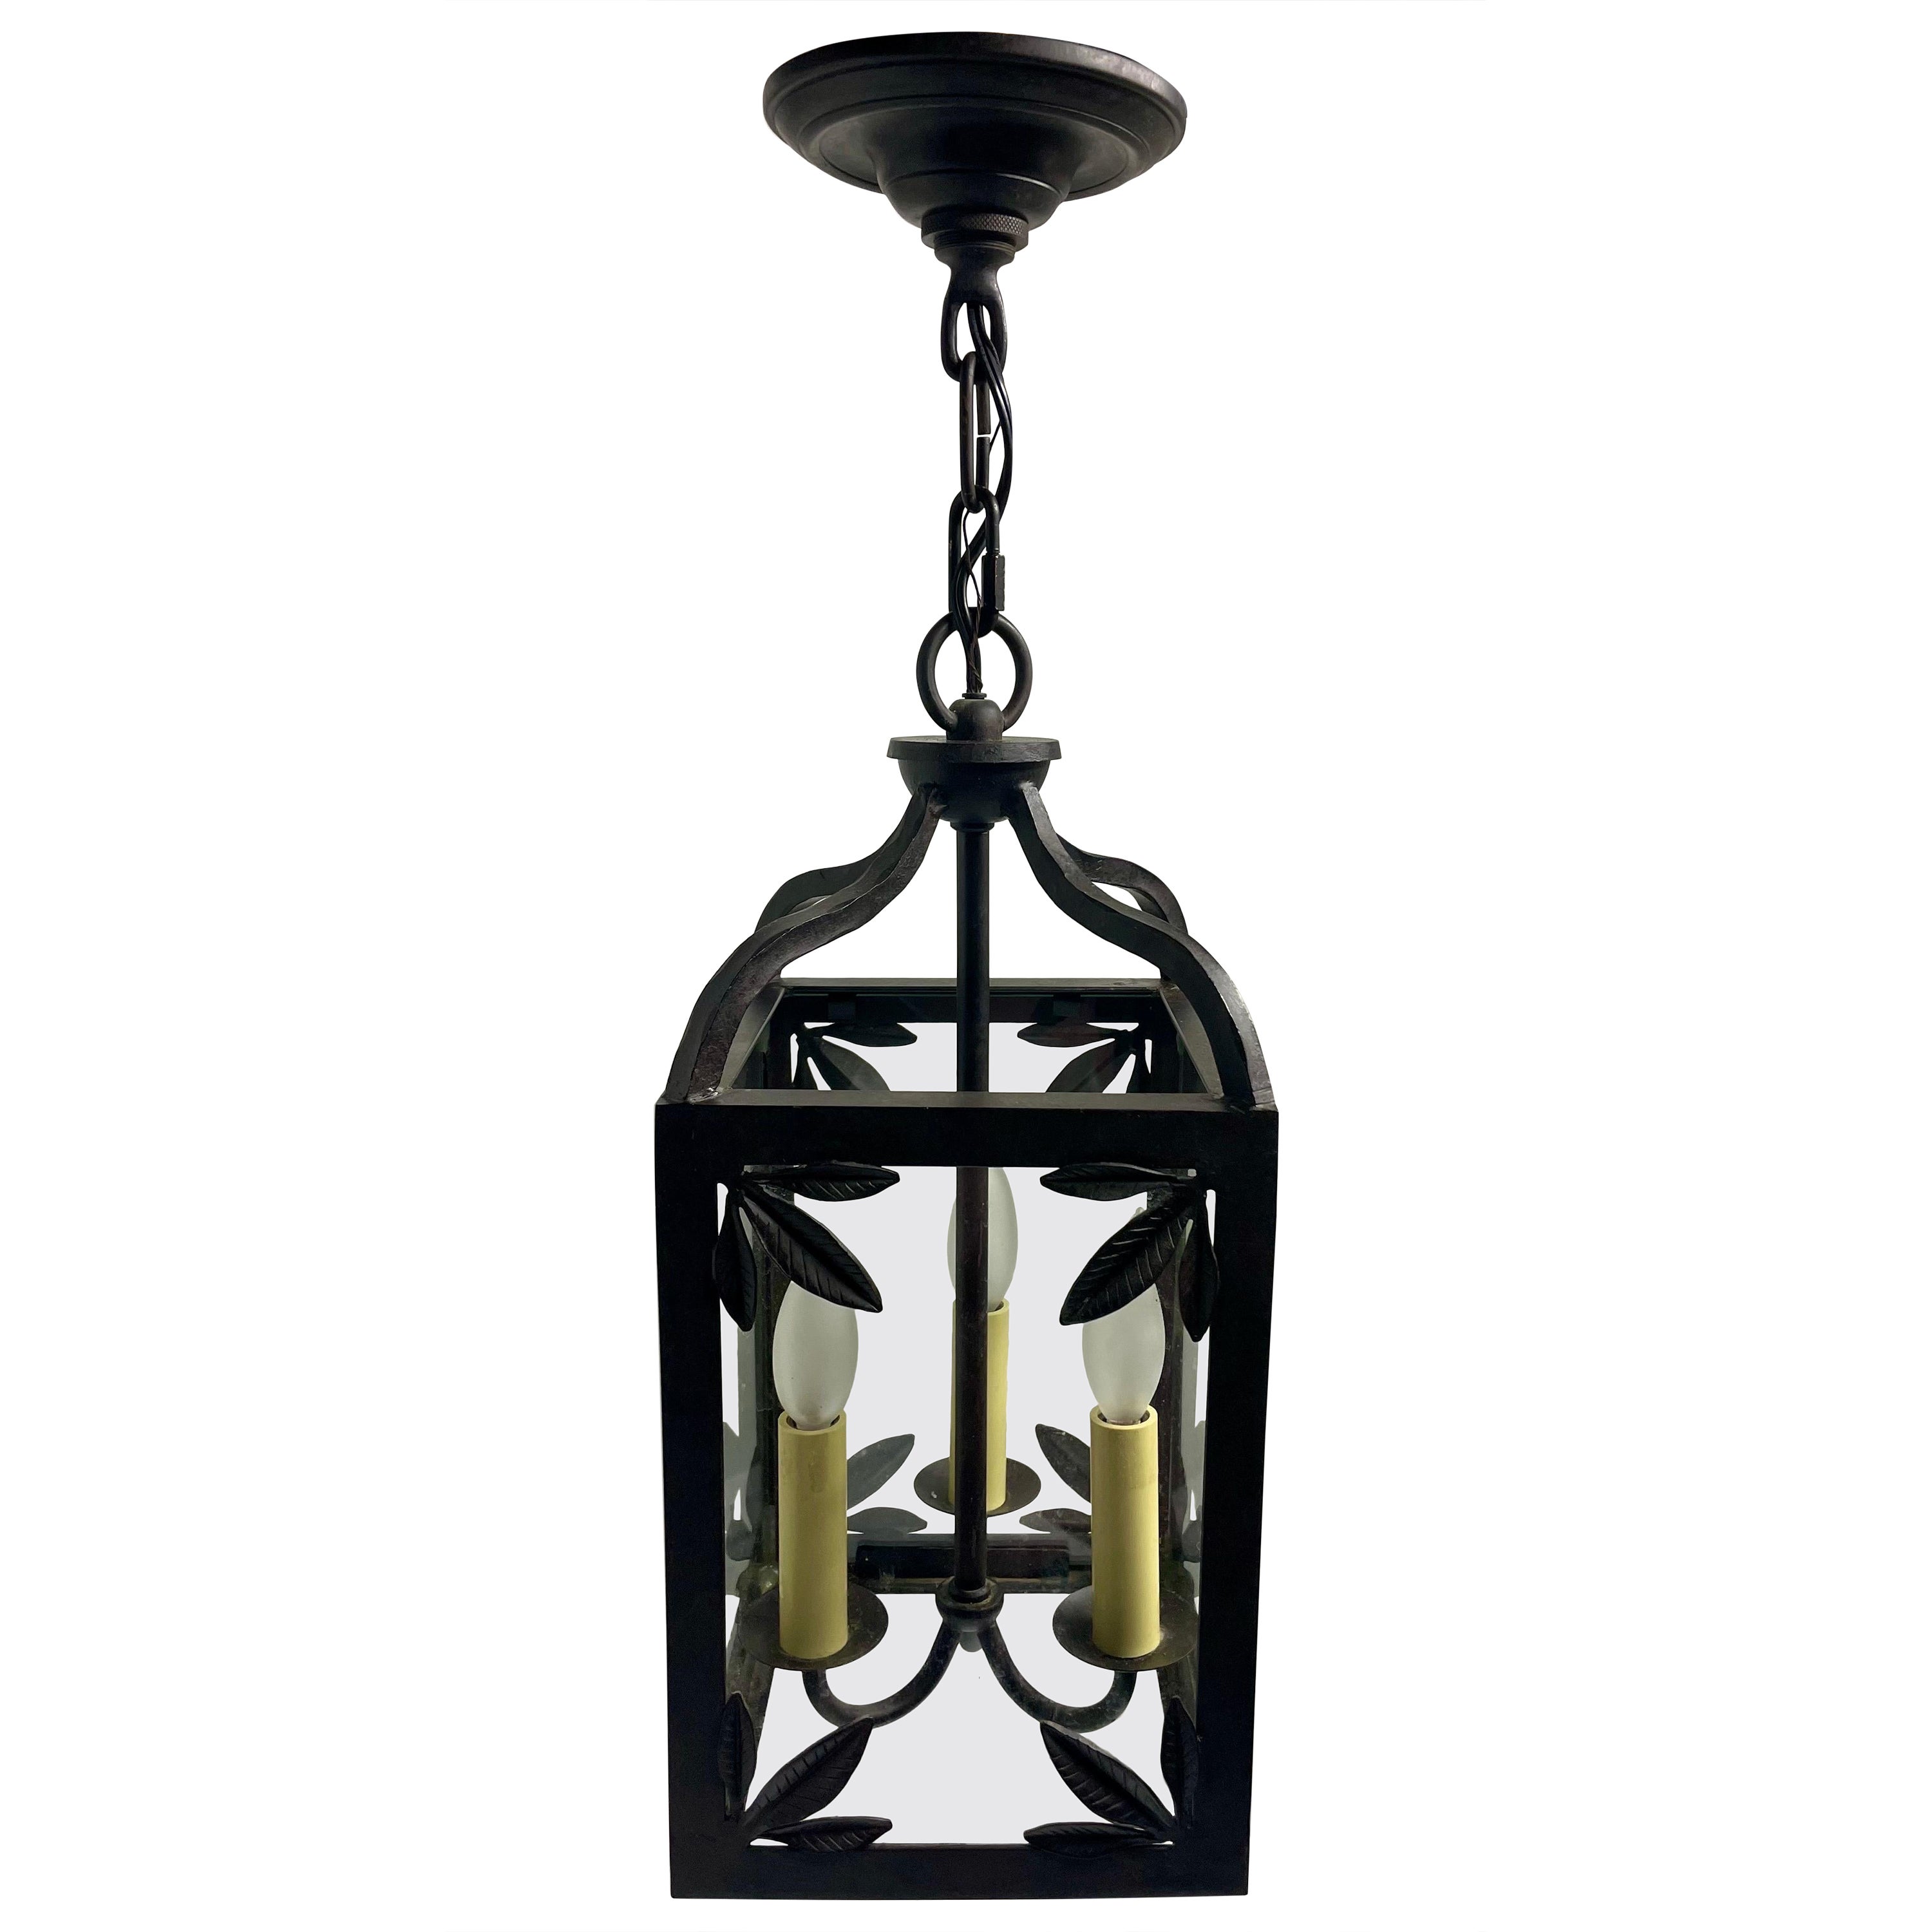 Wrought Iron Palm Leaf Pendant Chandelier For Sale